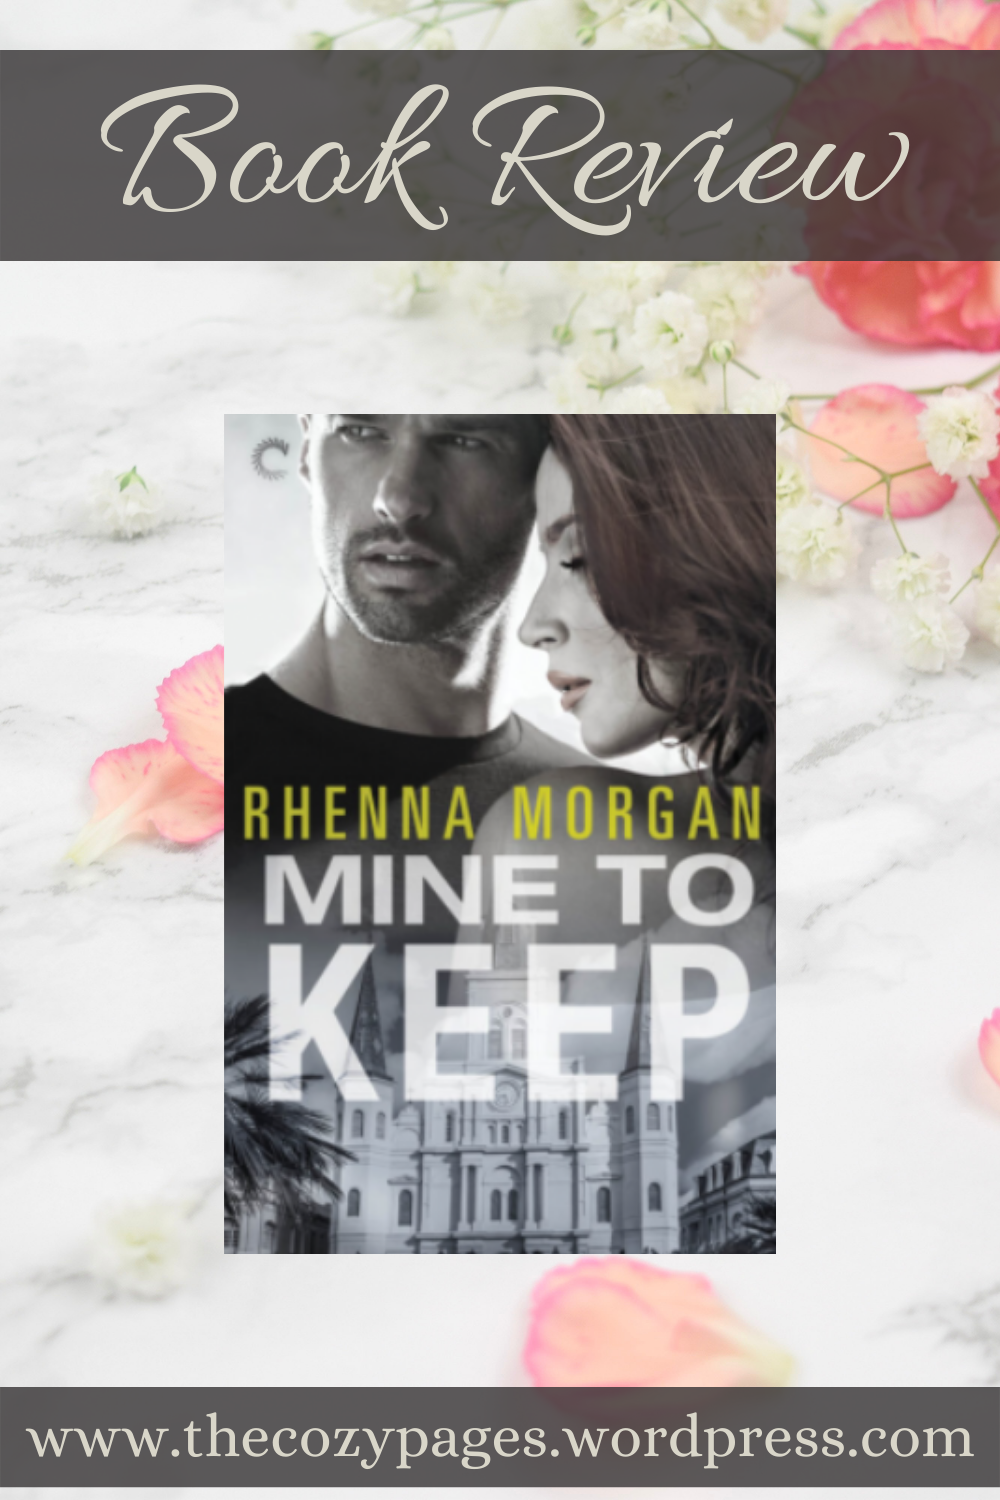 Mine to Keep by Rhenna Morgan review